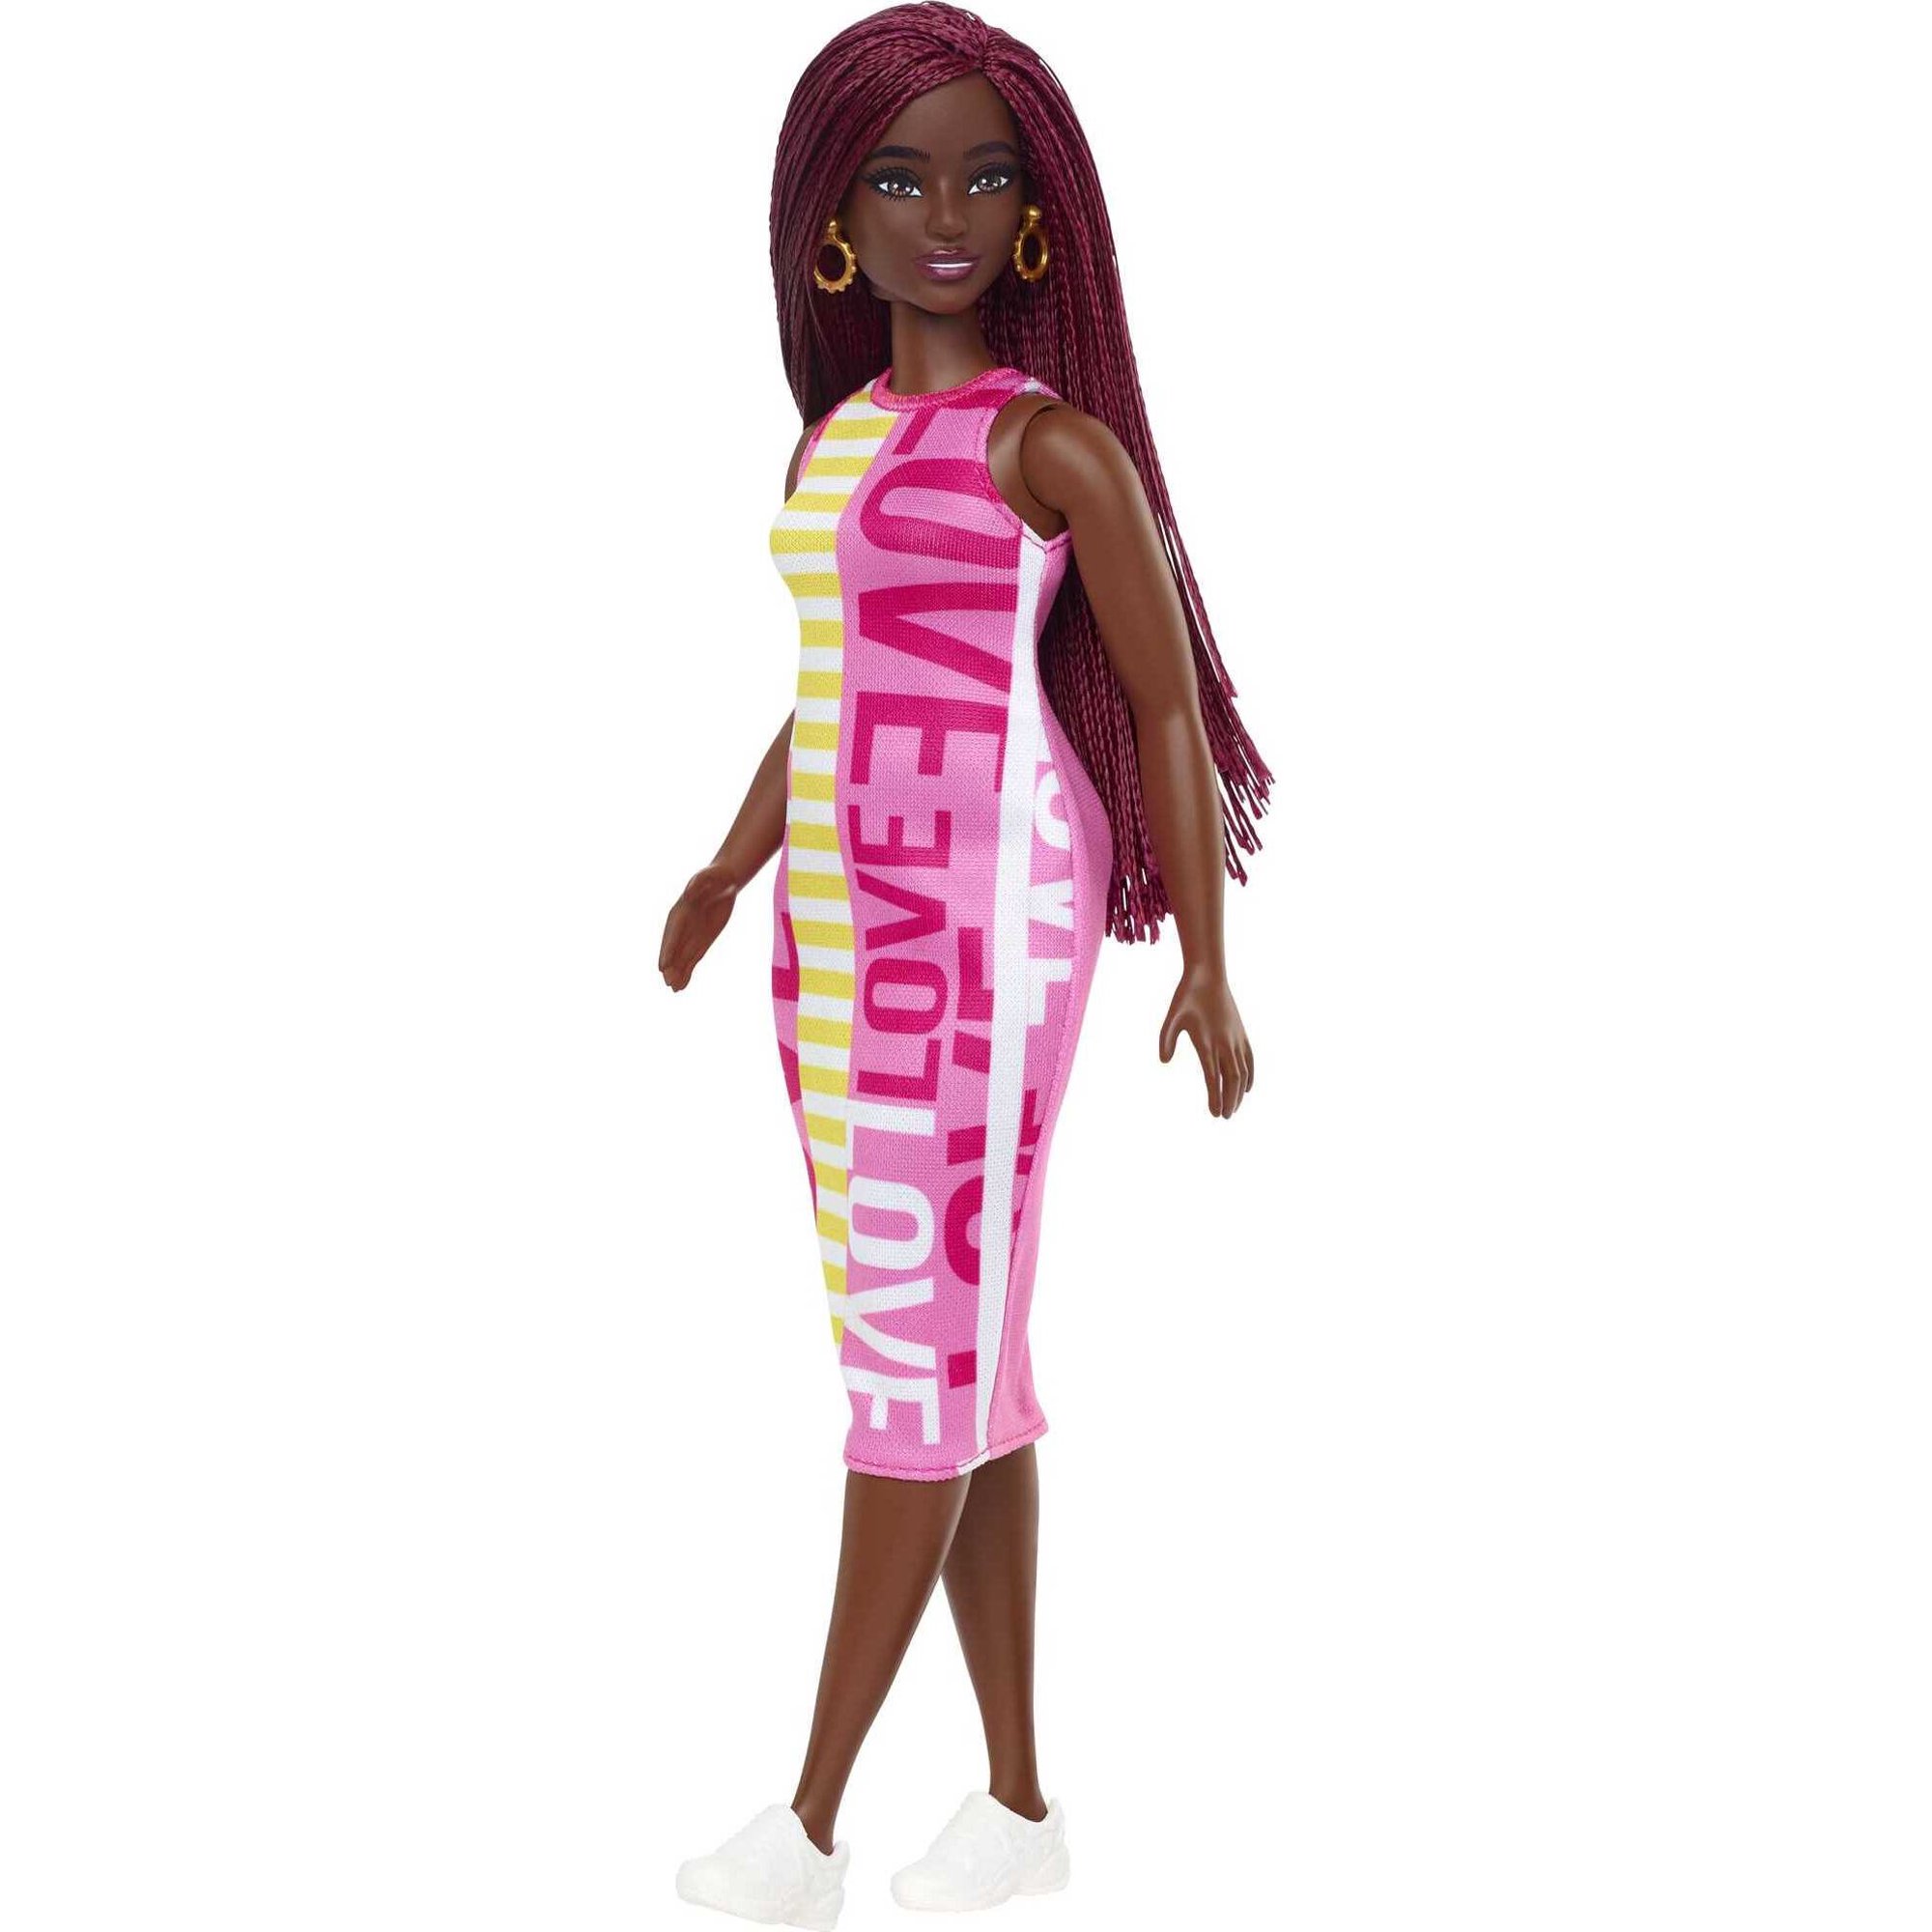 New Barbie Fashionistas 2022 dolls wave 1 and 2 - YouLoveIt.com